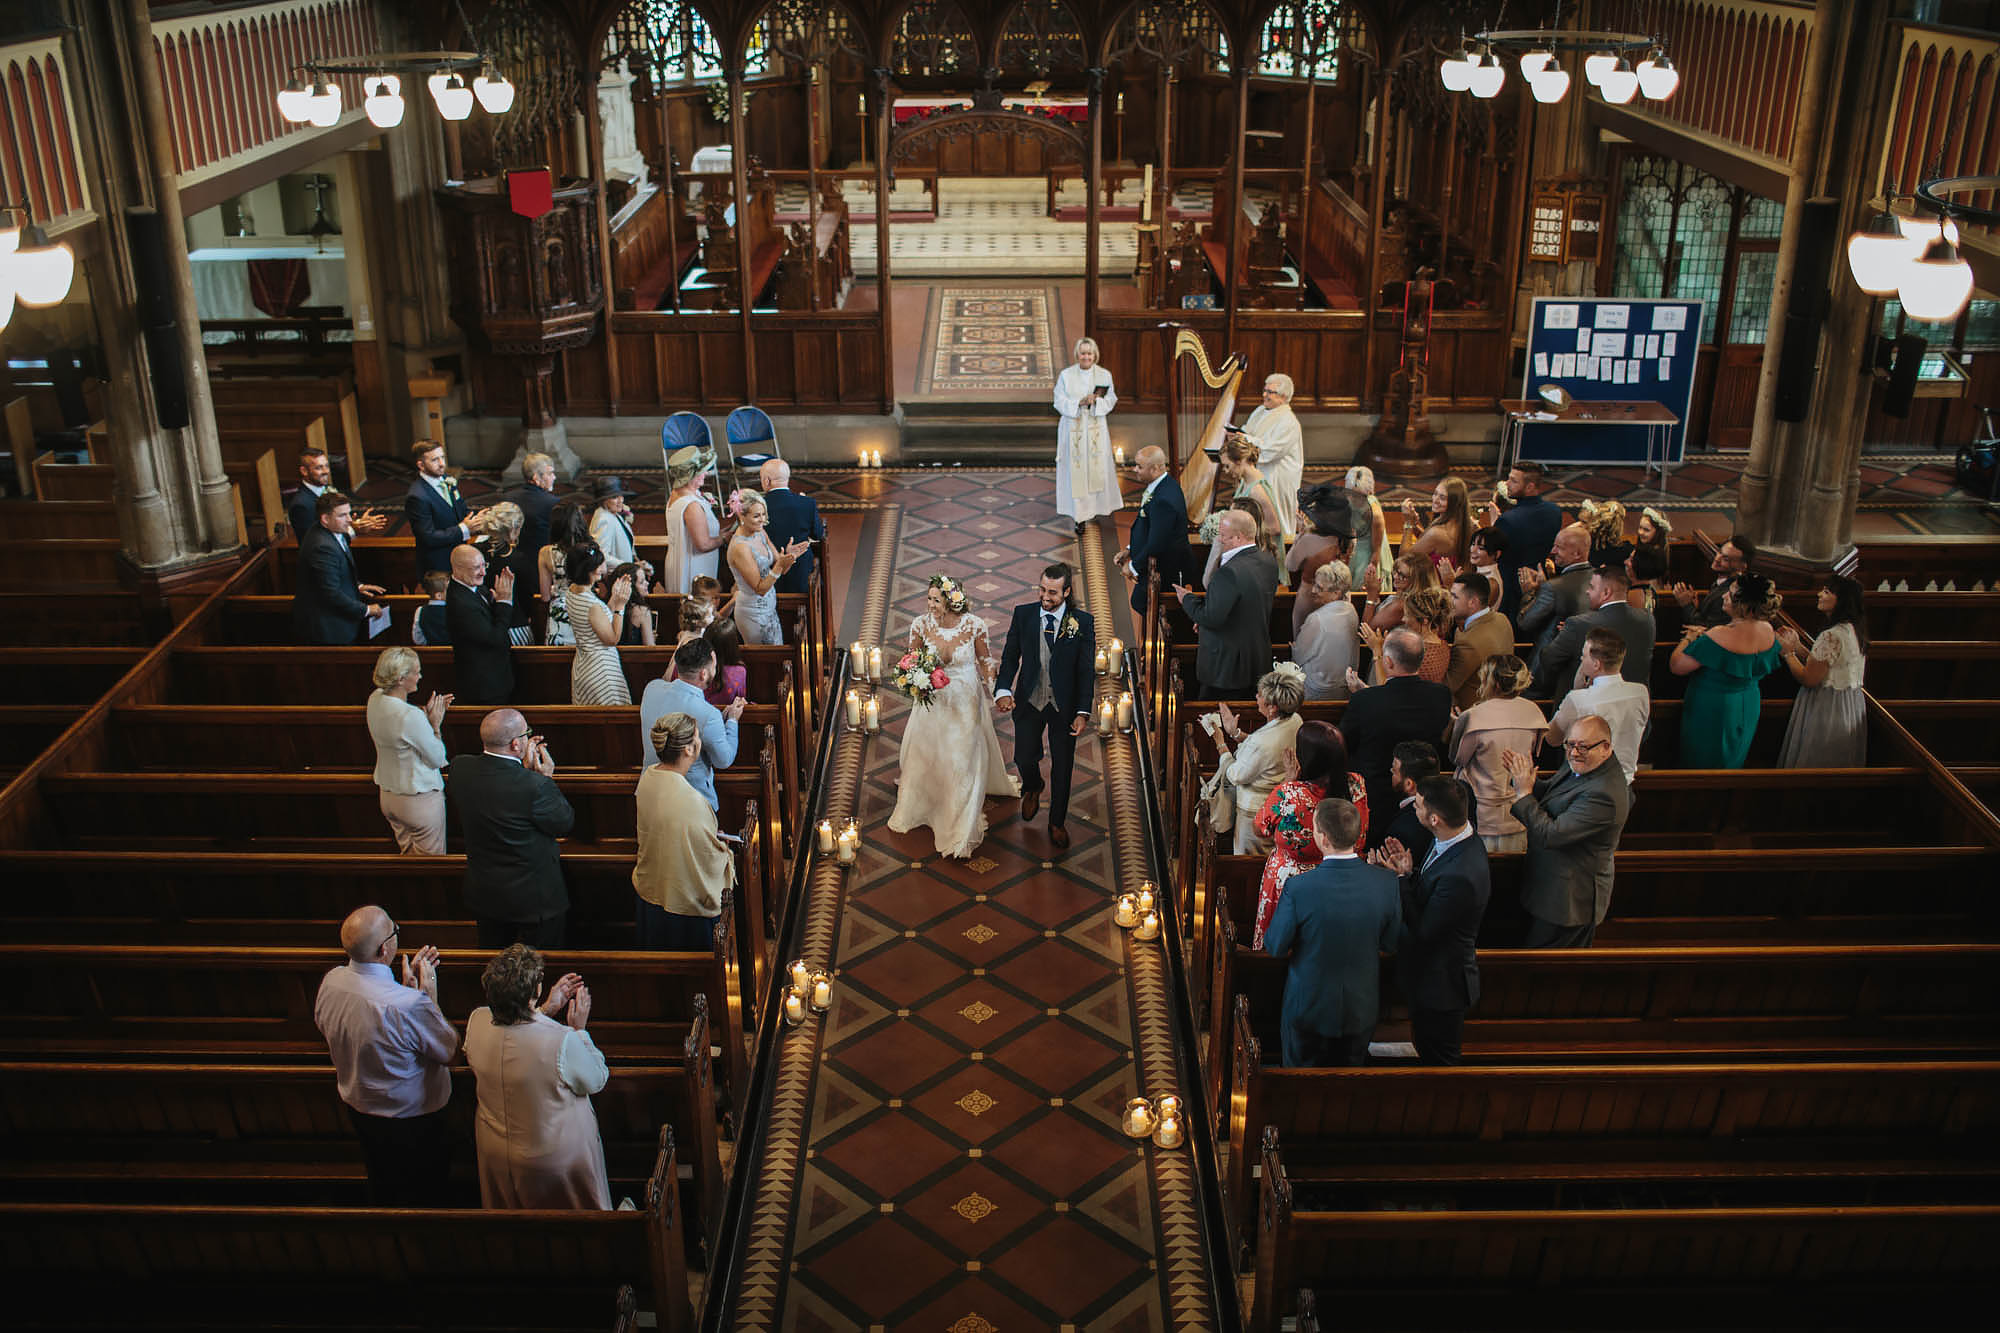 Bride and groom walk down the church aisle as a married couple